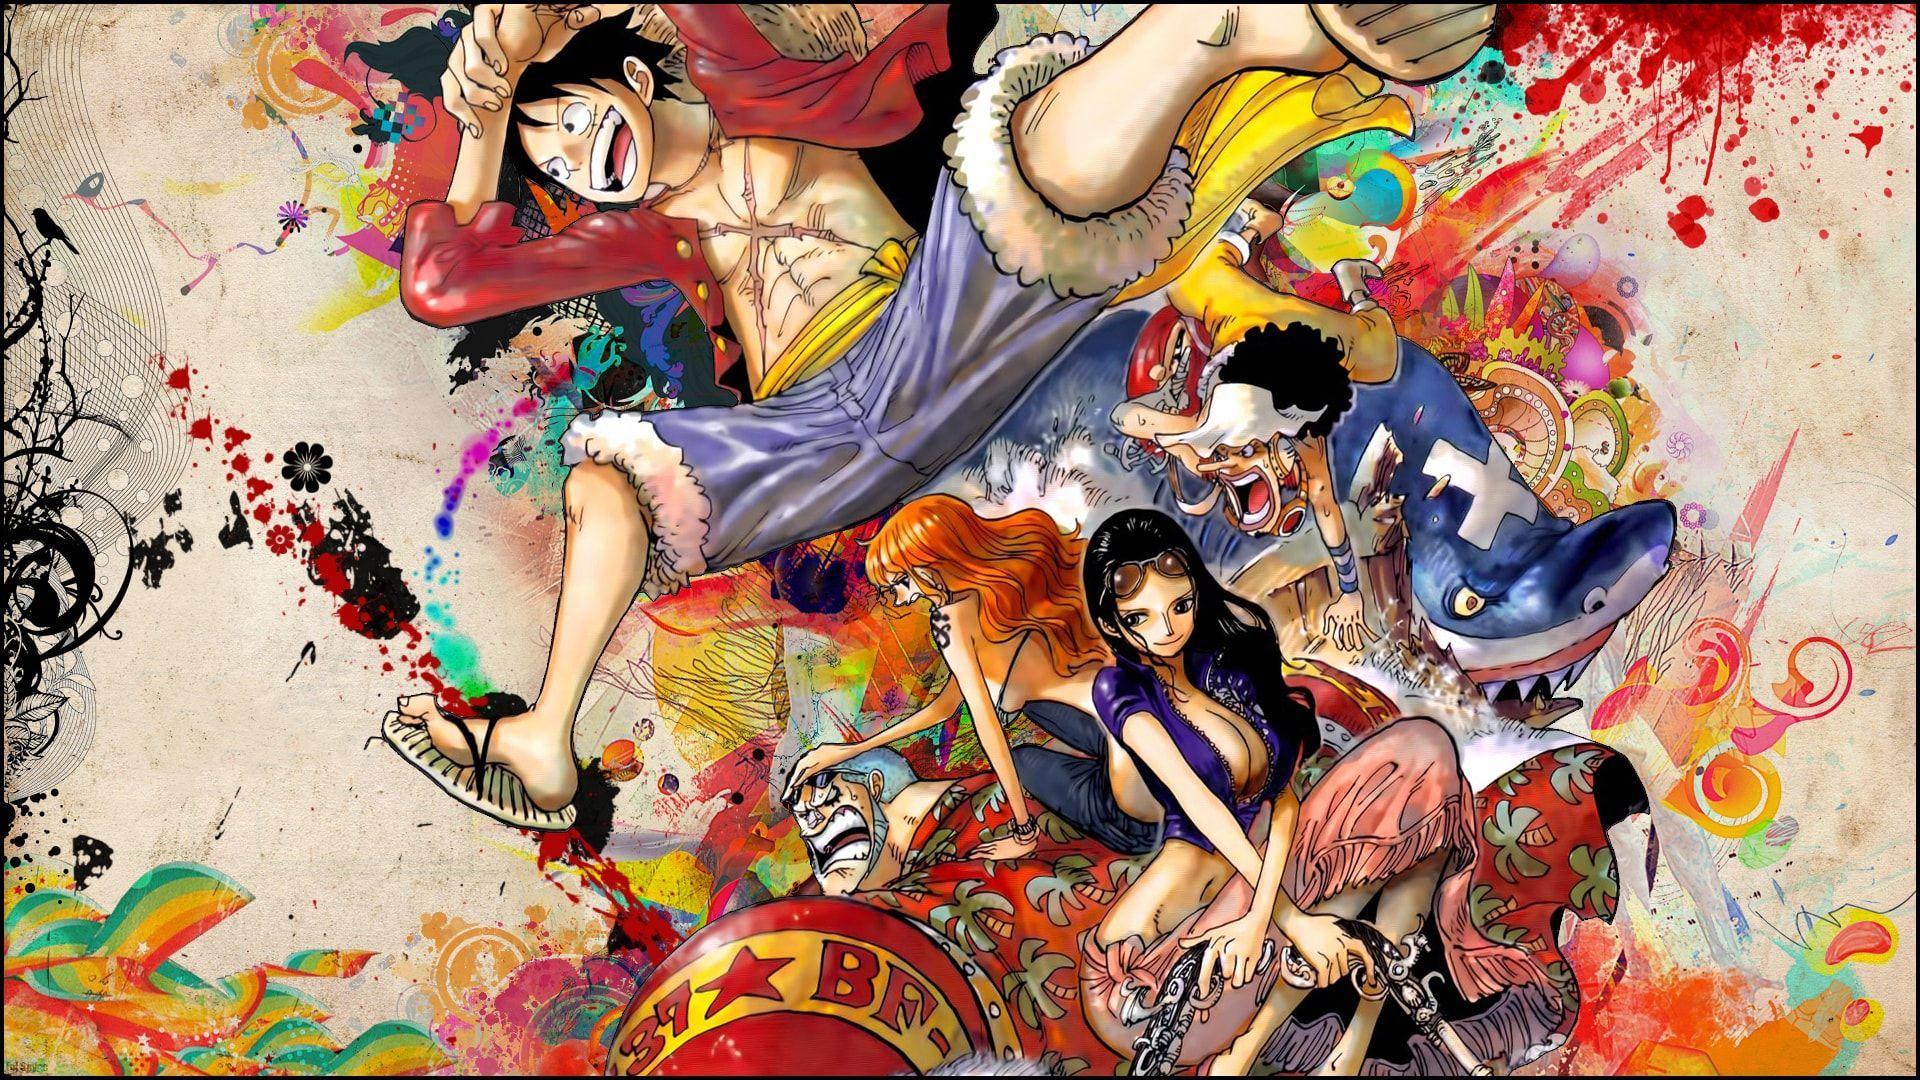 Straw Hat Pirates Wallpapers - Top Free Straw Hat Pirates Backgrounds